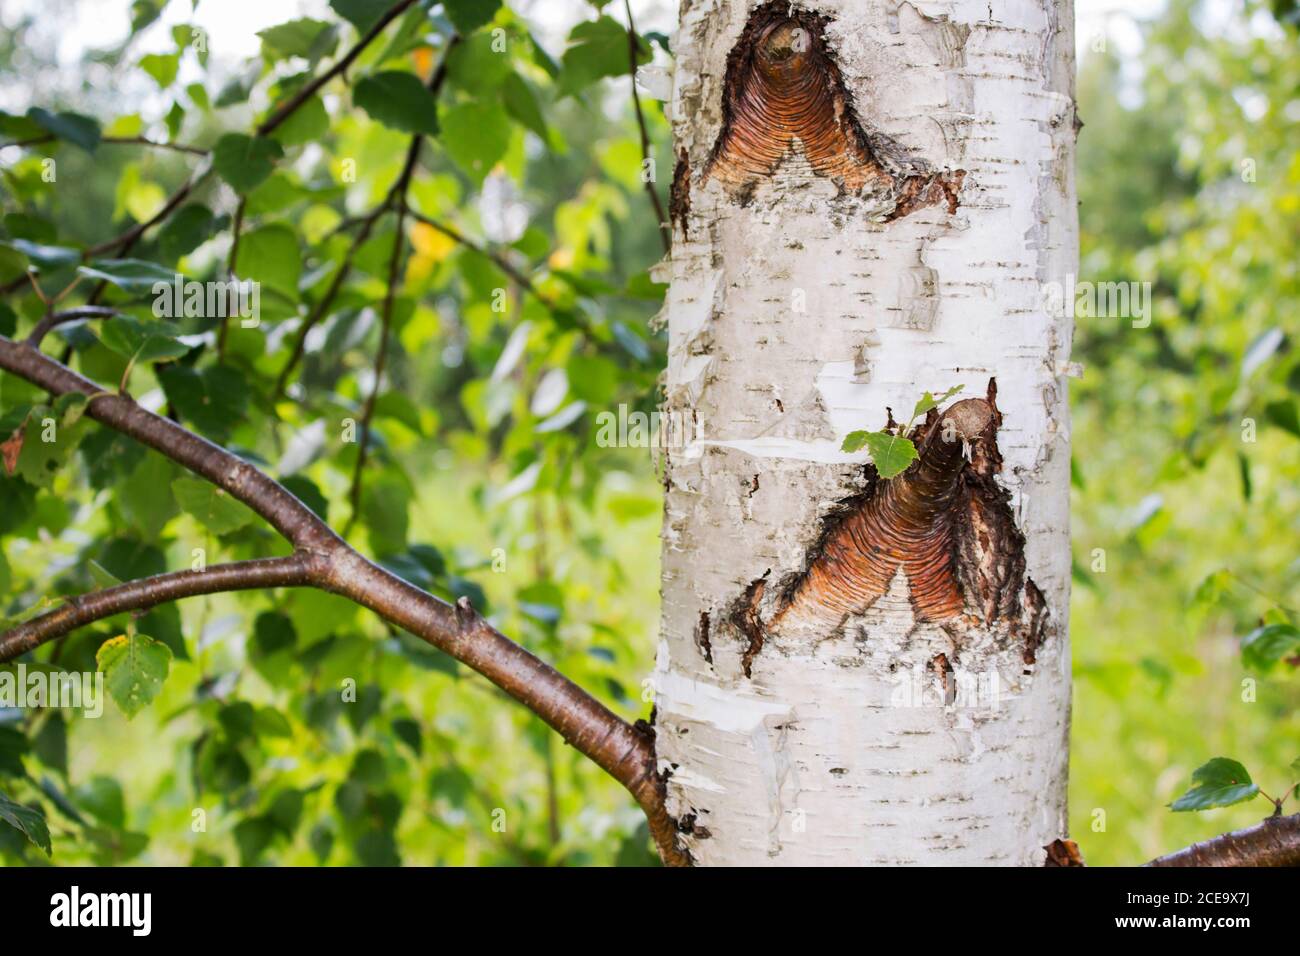 Trunks of birch trees in the foreground Stock Photo